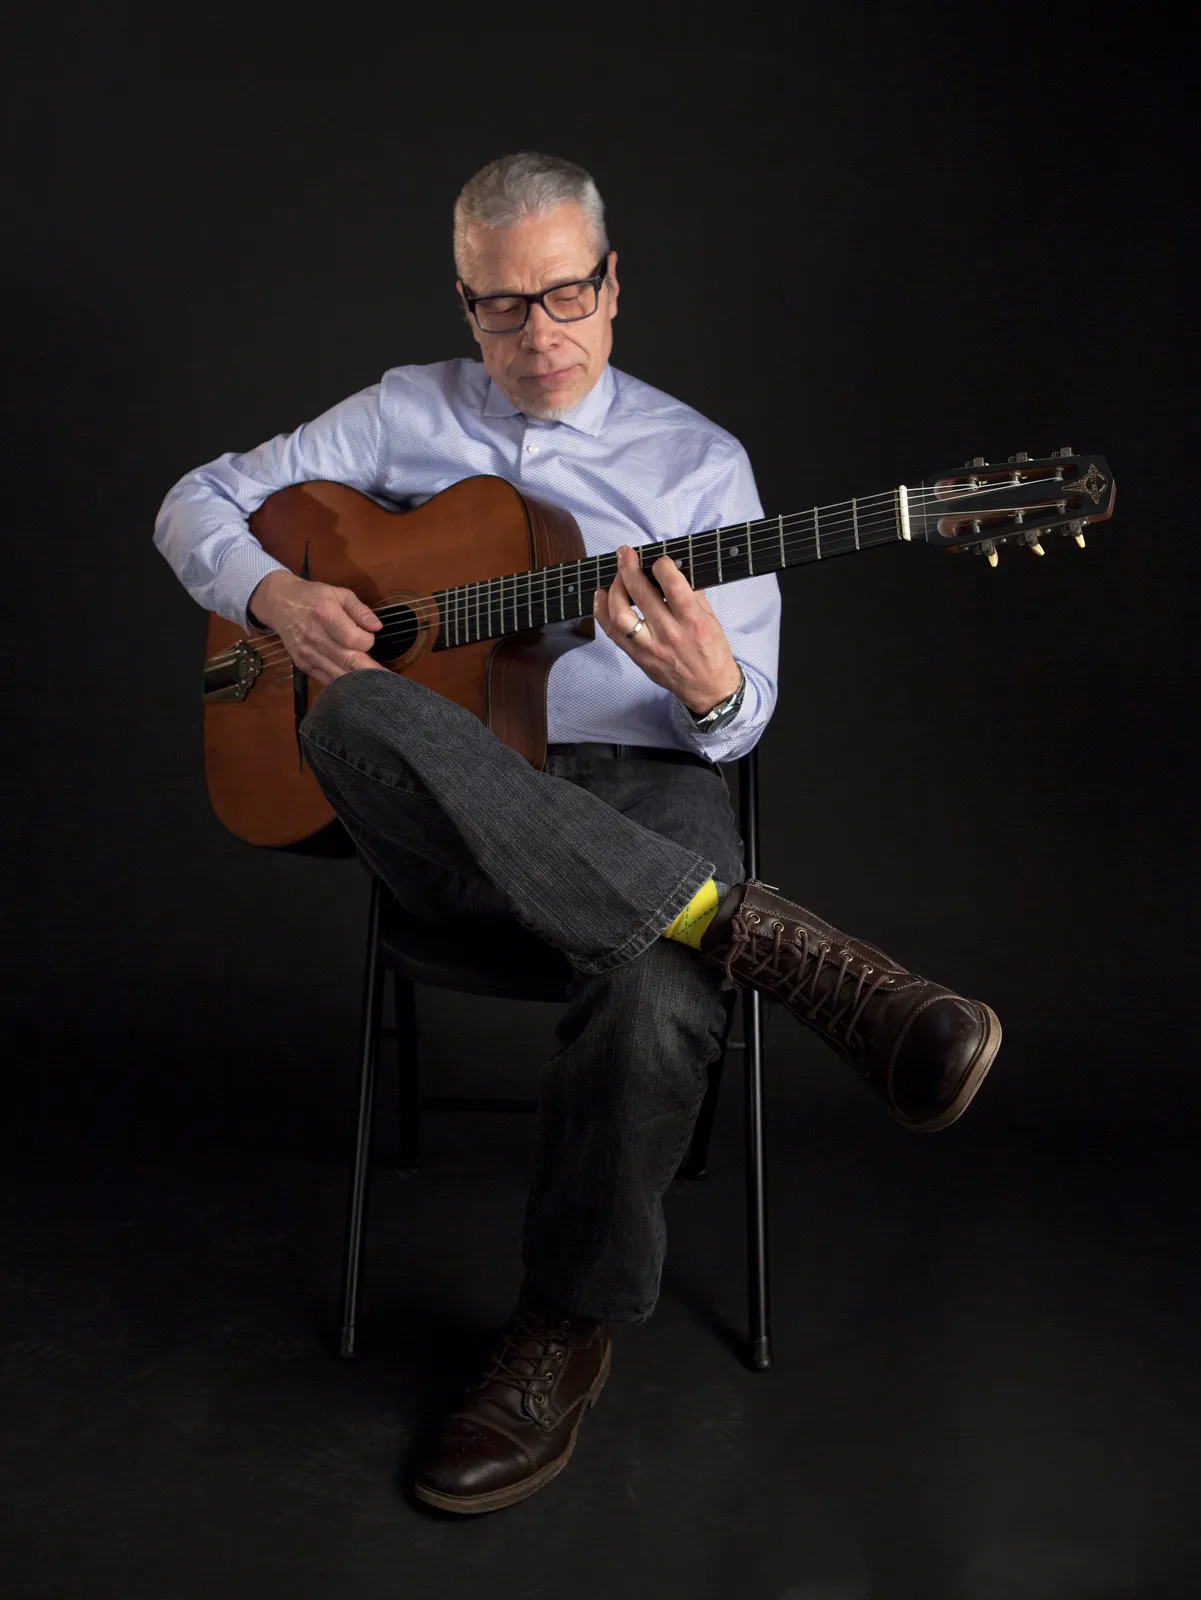 Black room portrait of Doug Munro playing a classic acoustic guitar.